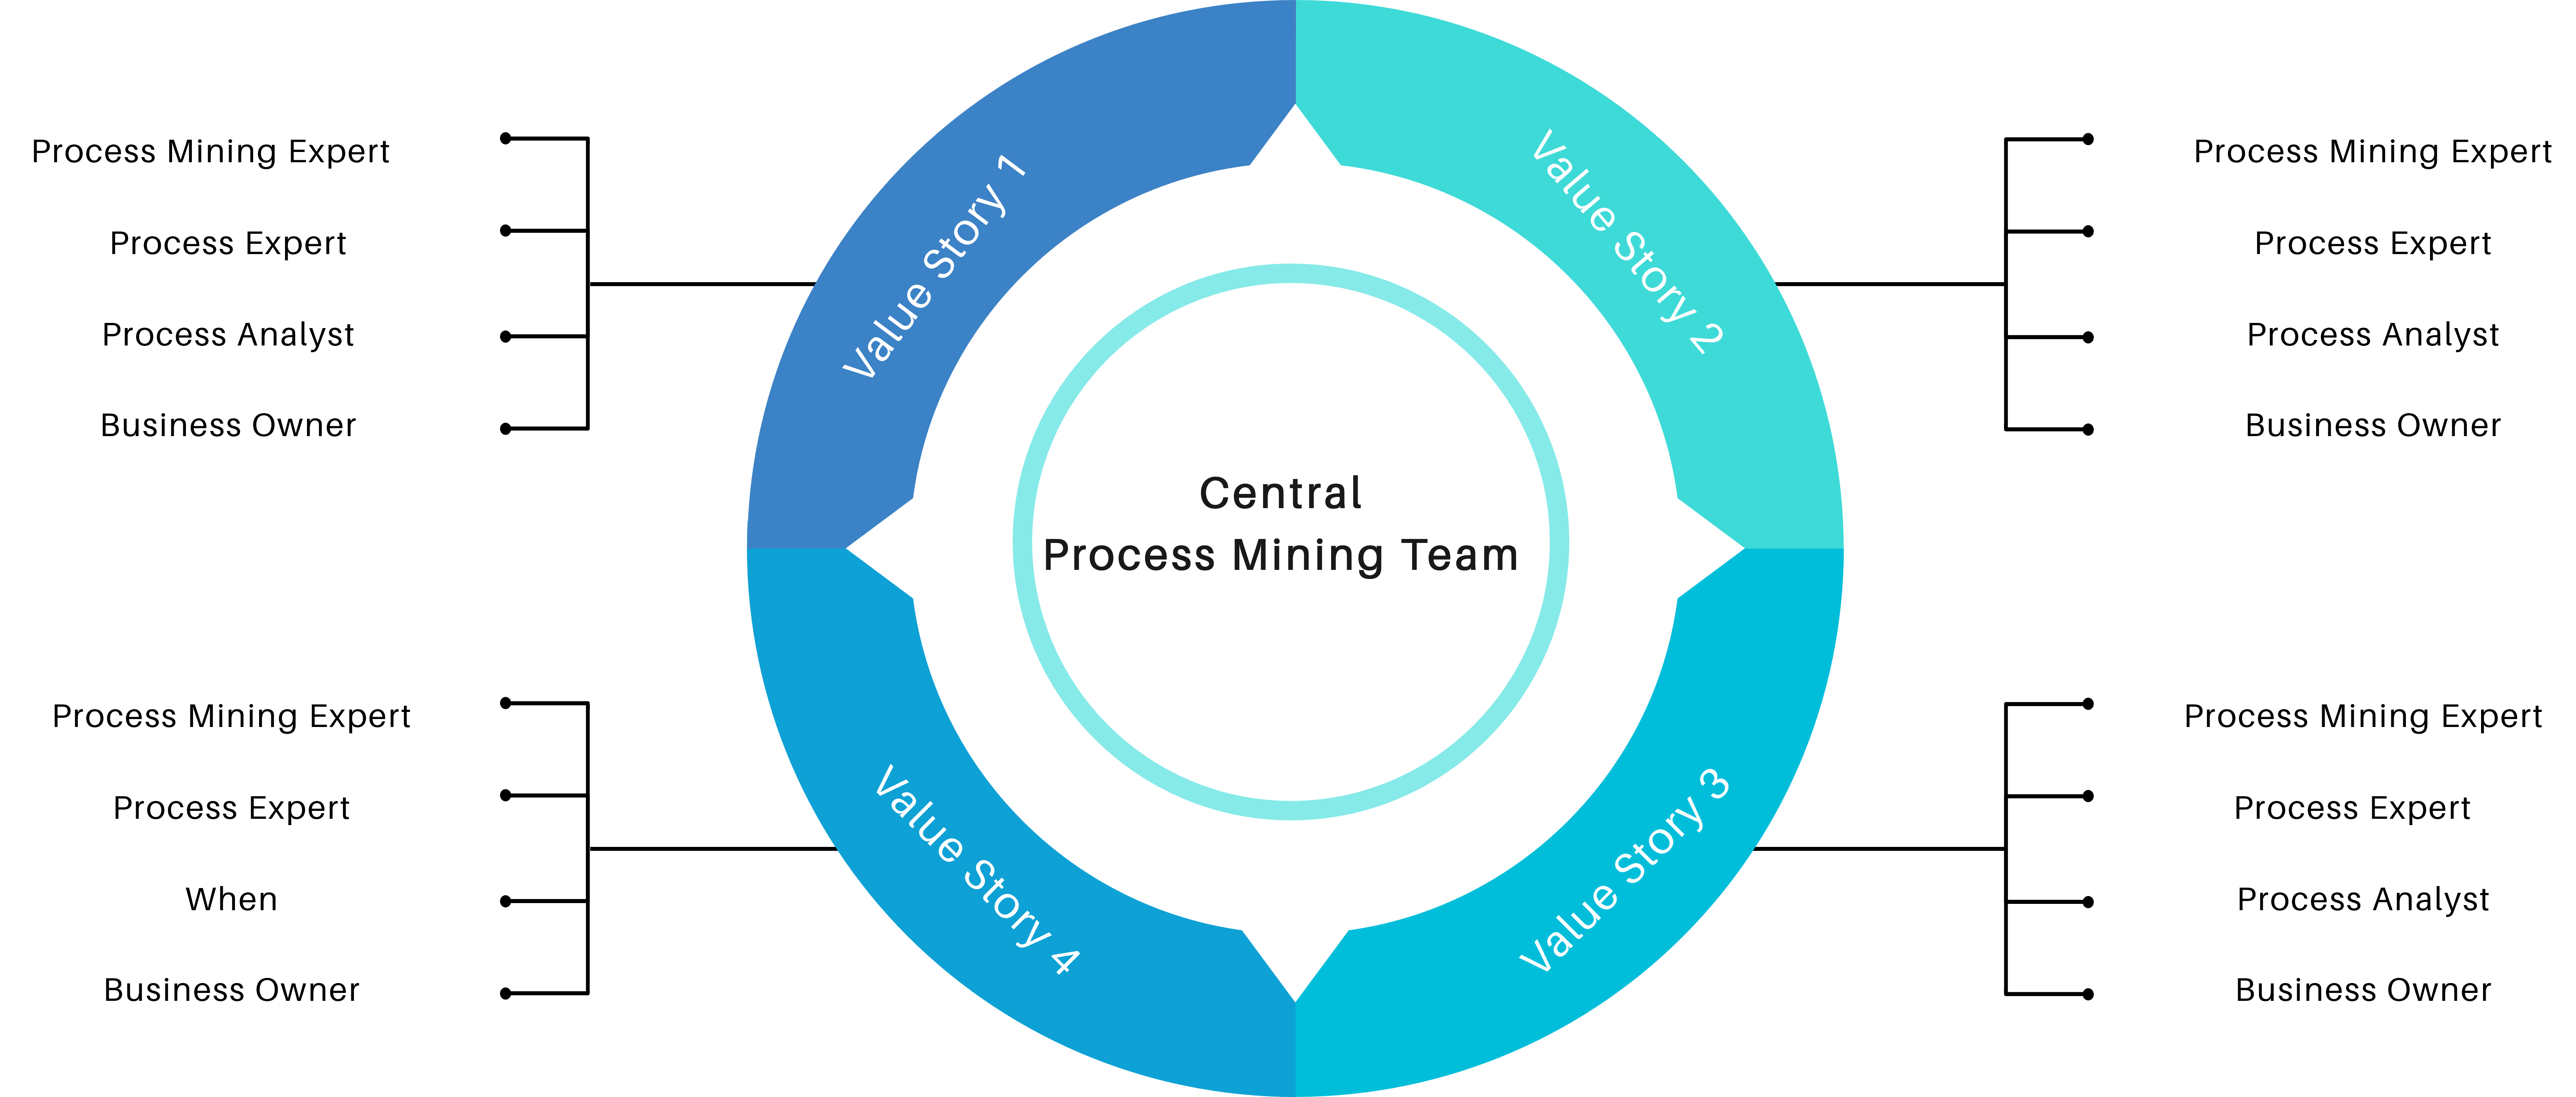 Central Process Mining Team and their value stories.